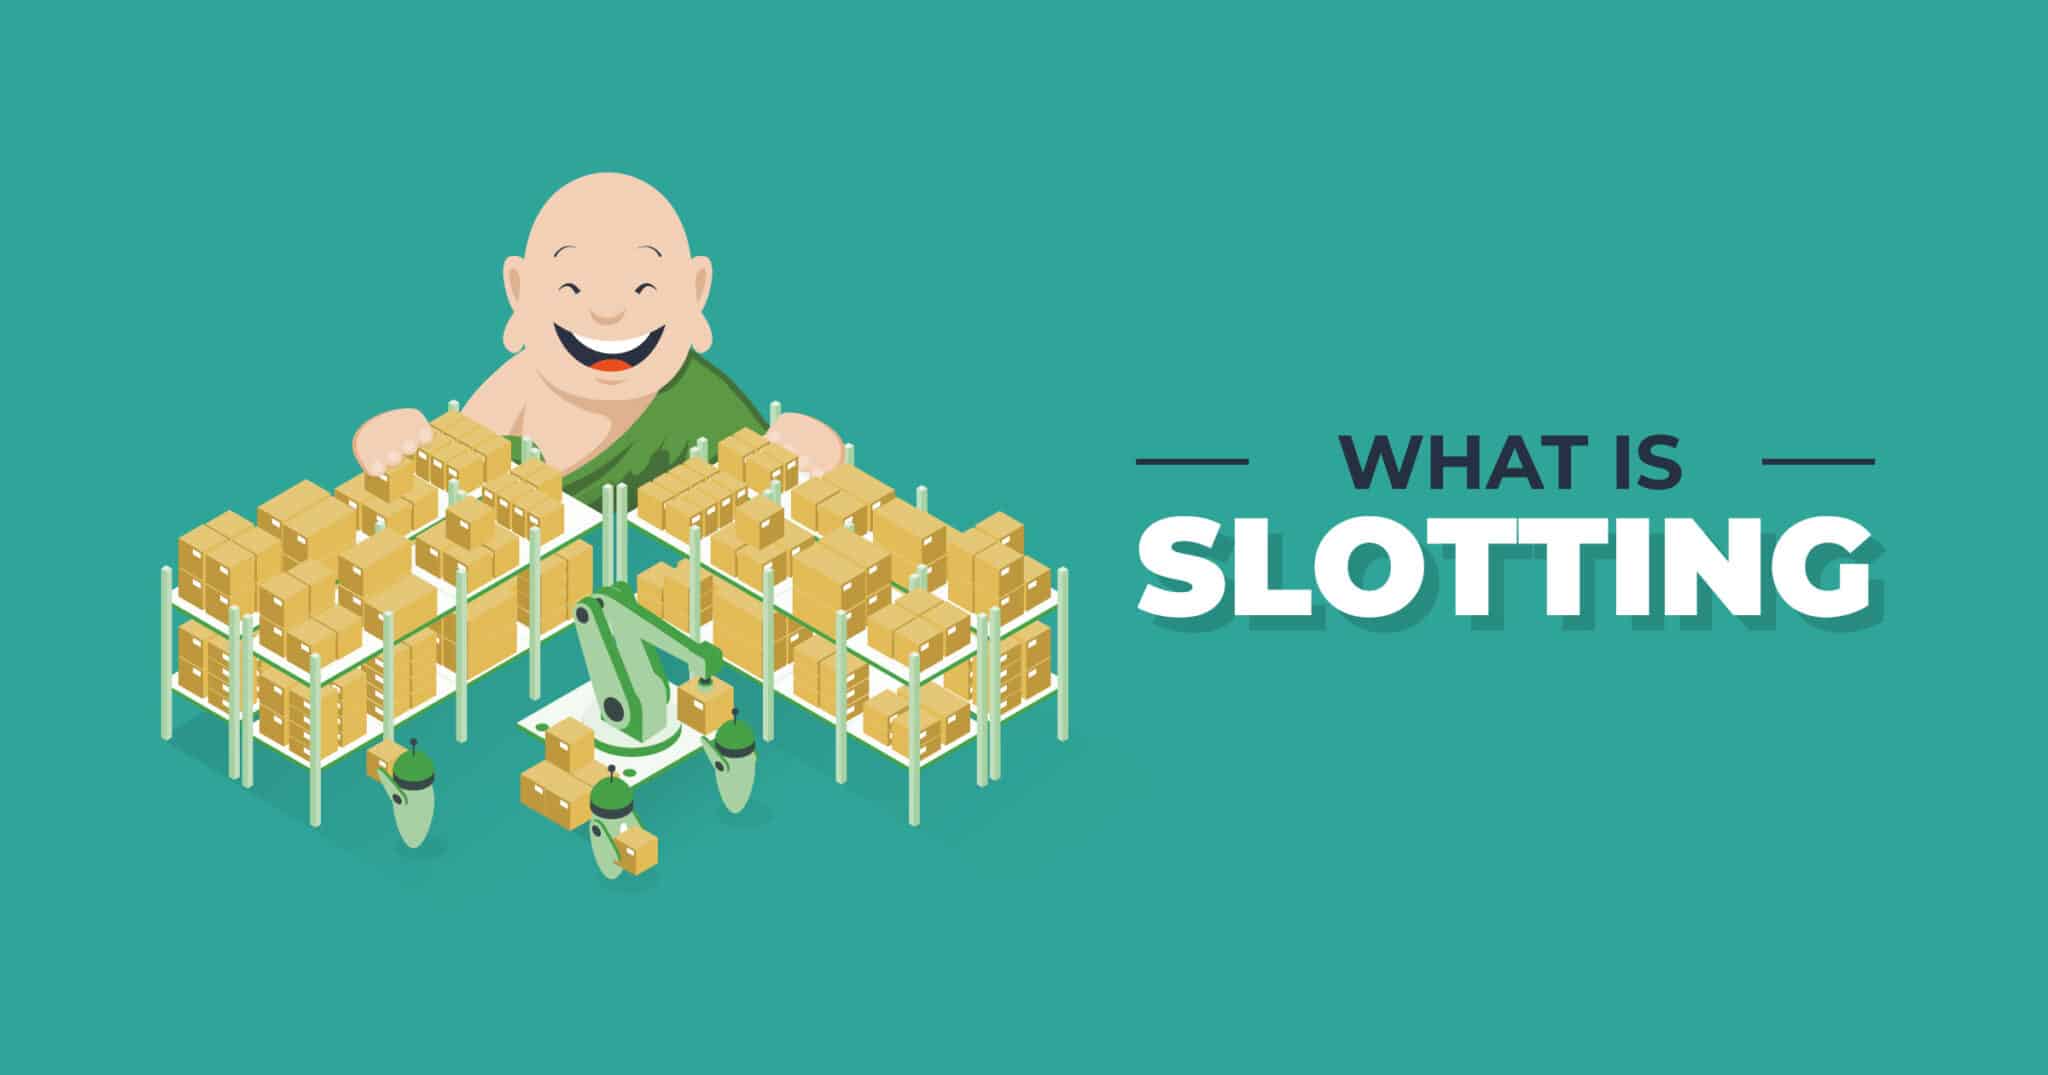 What is Slotting?